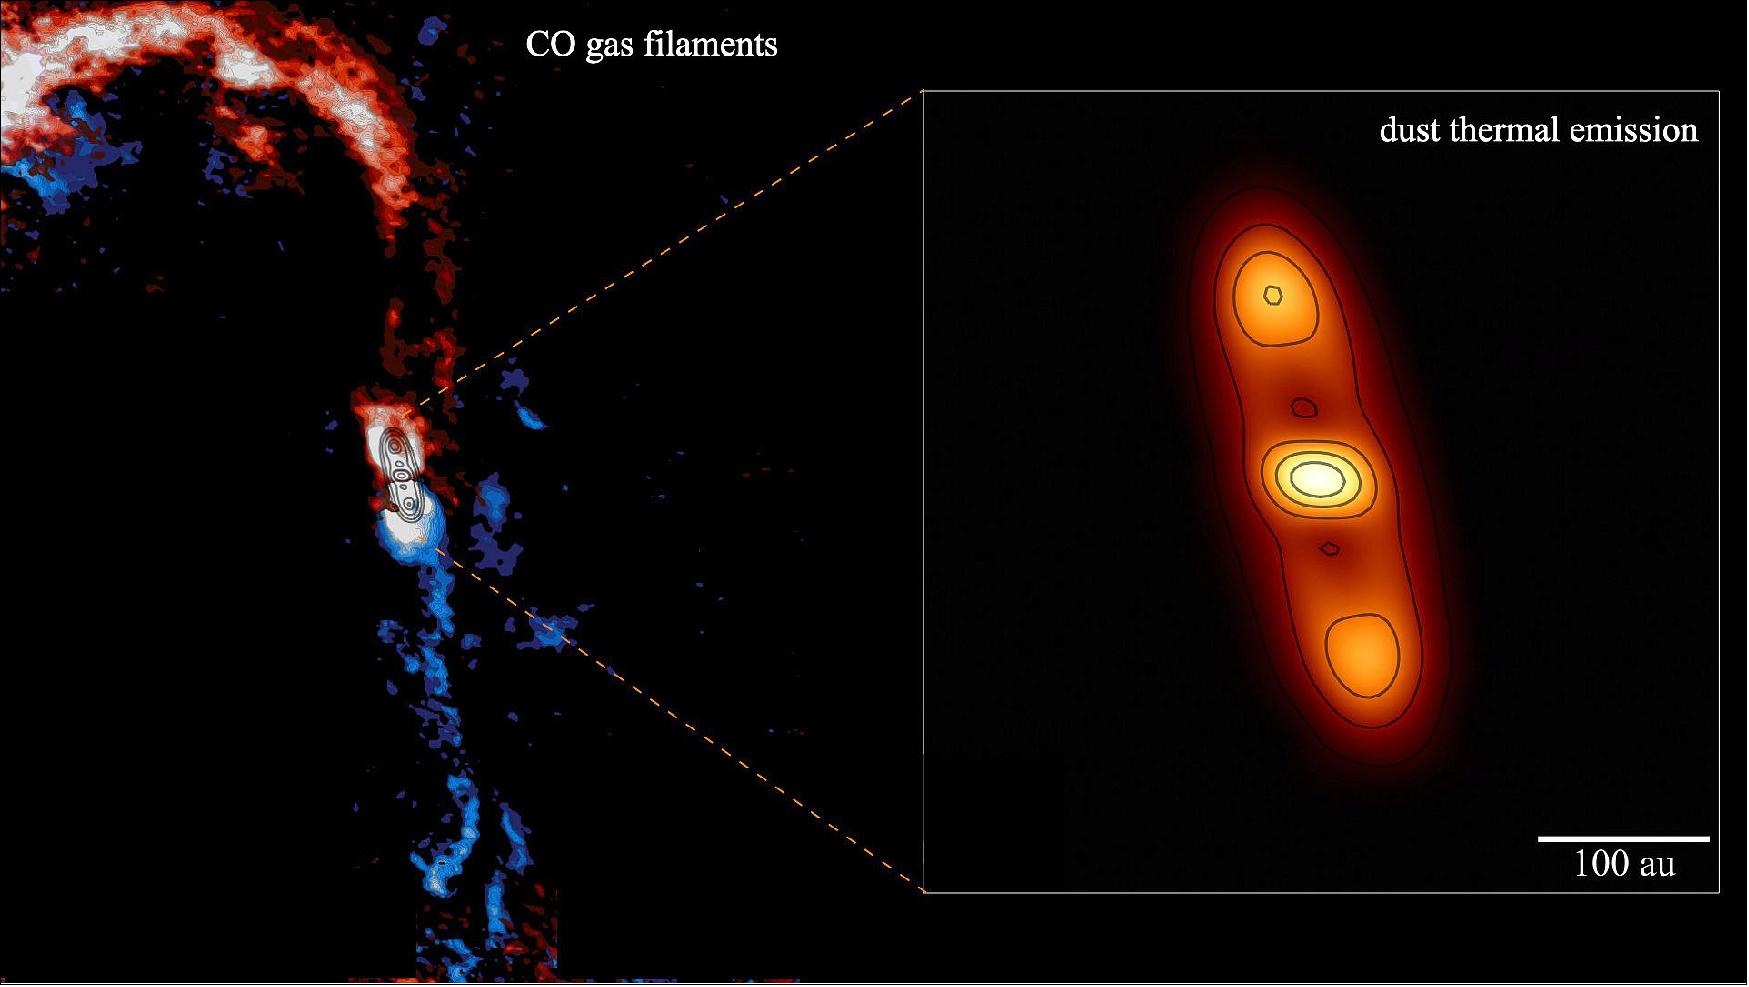 Figure 46: This false-color image shows the filaments of accretion around the protostar [BHB2007] 1. The large structures are inflows of molecular gas (CO) nurturing the disk surrounding the protostar. The inset shows the dust emission from the disk, which is seen edge-on. The "holes" in the dust map represent an enormous ringed cavity seen (sideways) in the disk structure (image credit: MPE)